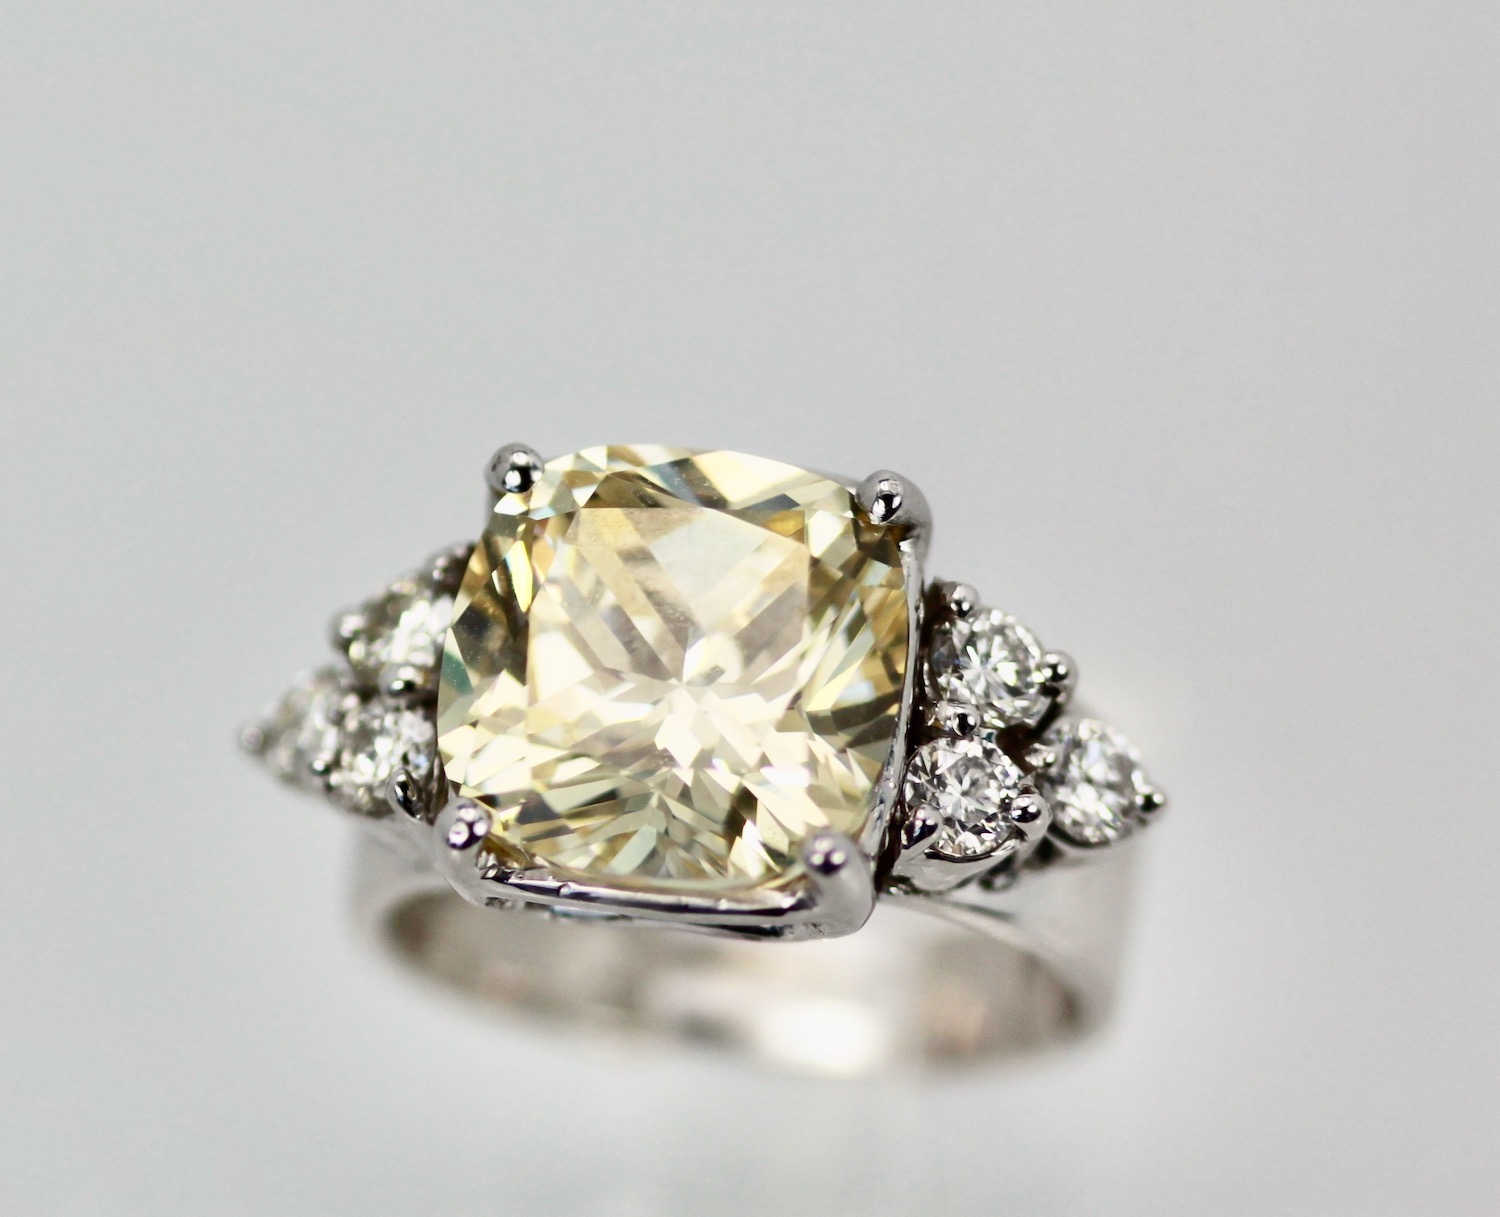 Large Yellow Sapphire Ring with Diamond Side Accents – close up